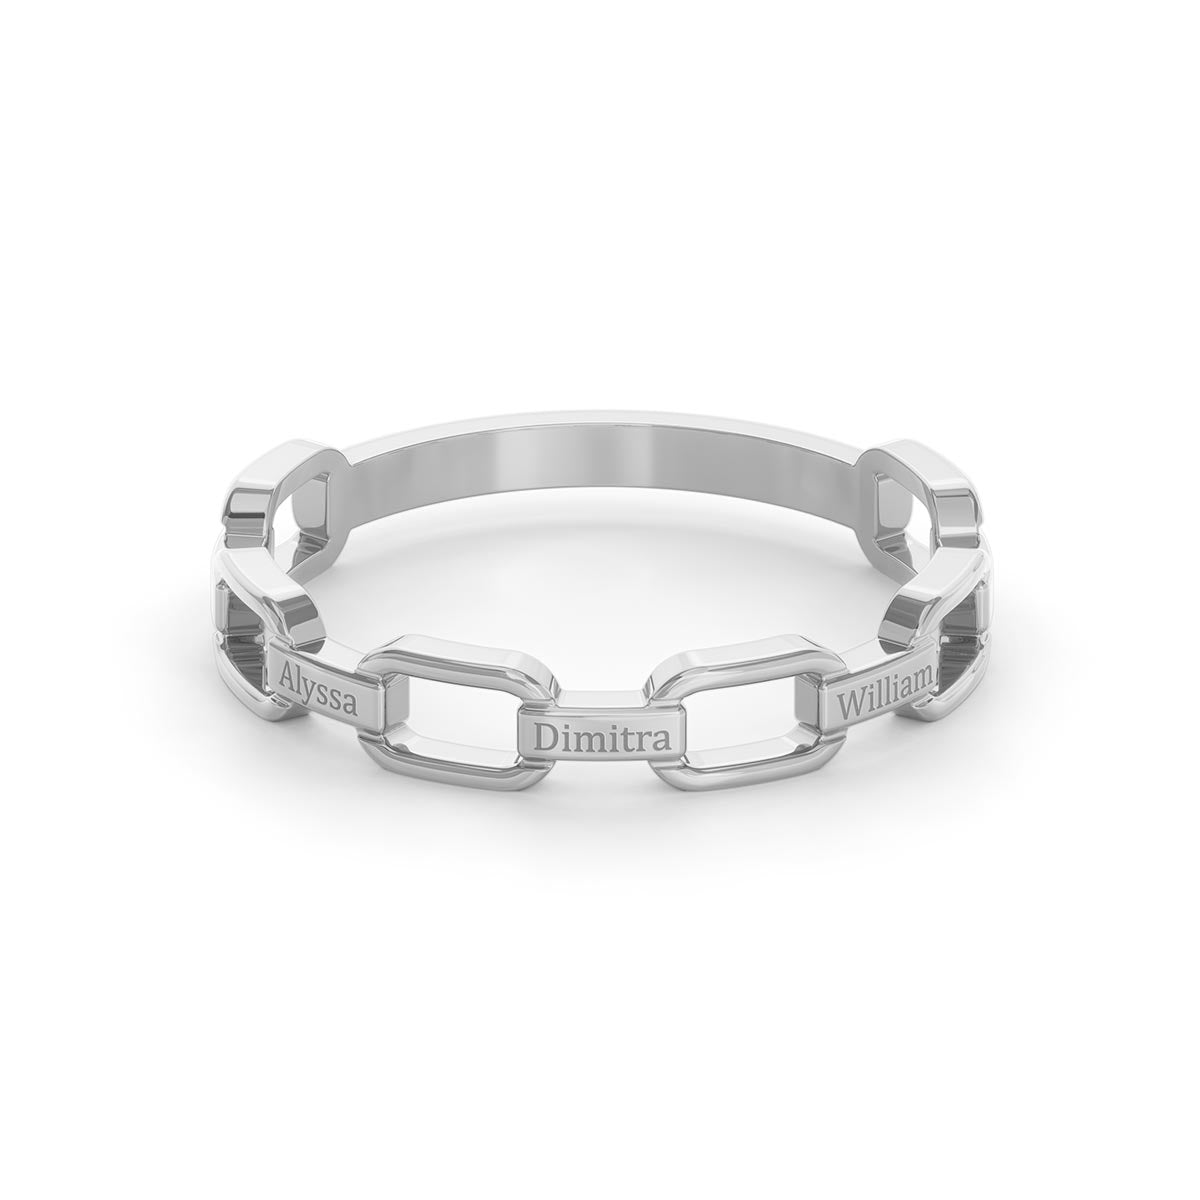 Chain Link Ring with Personalized Engravings